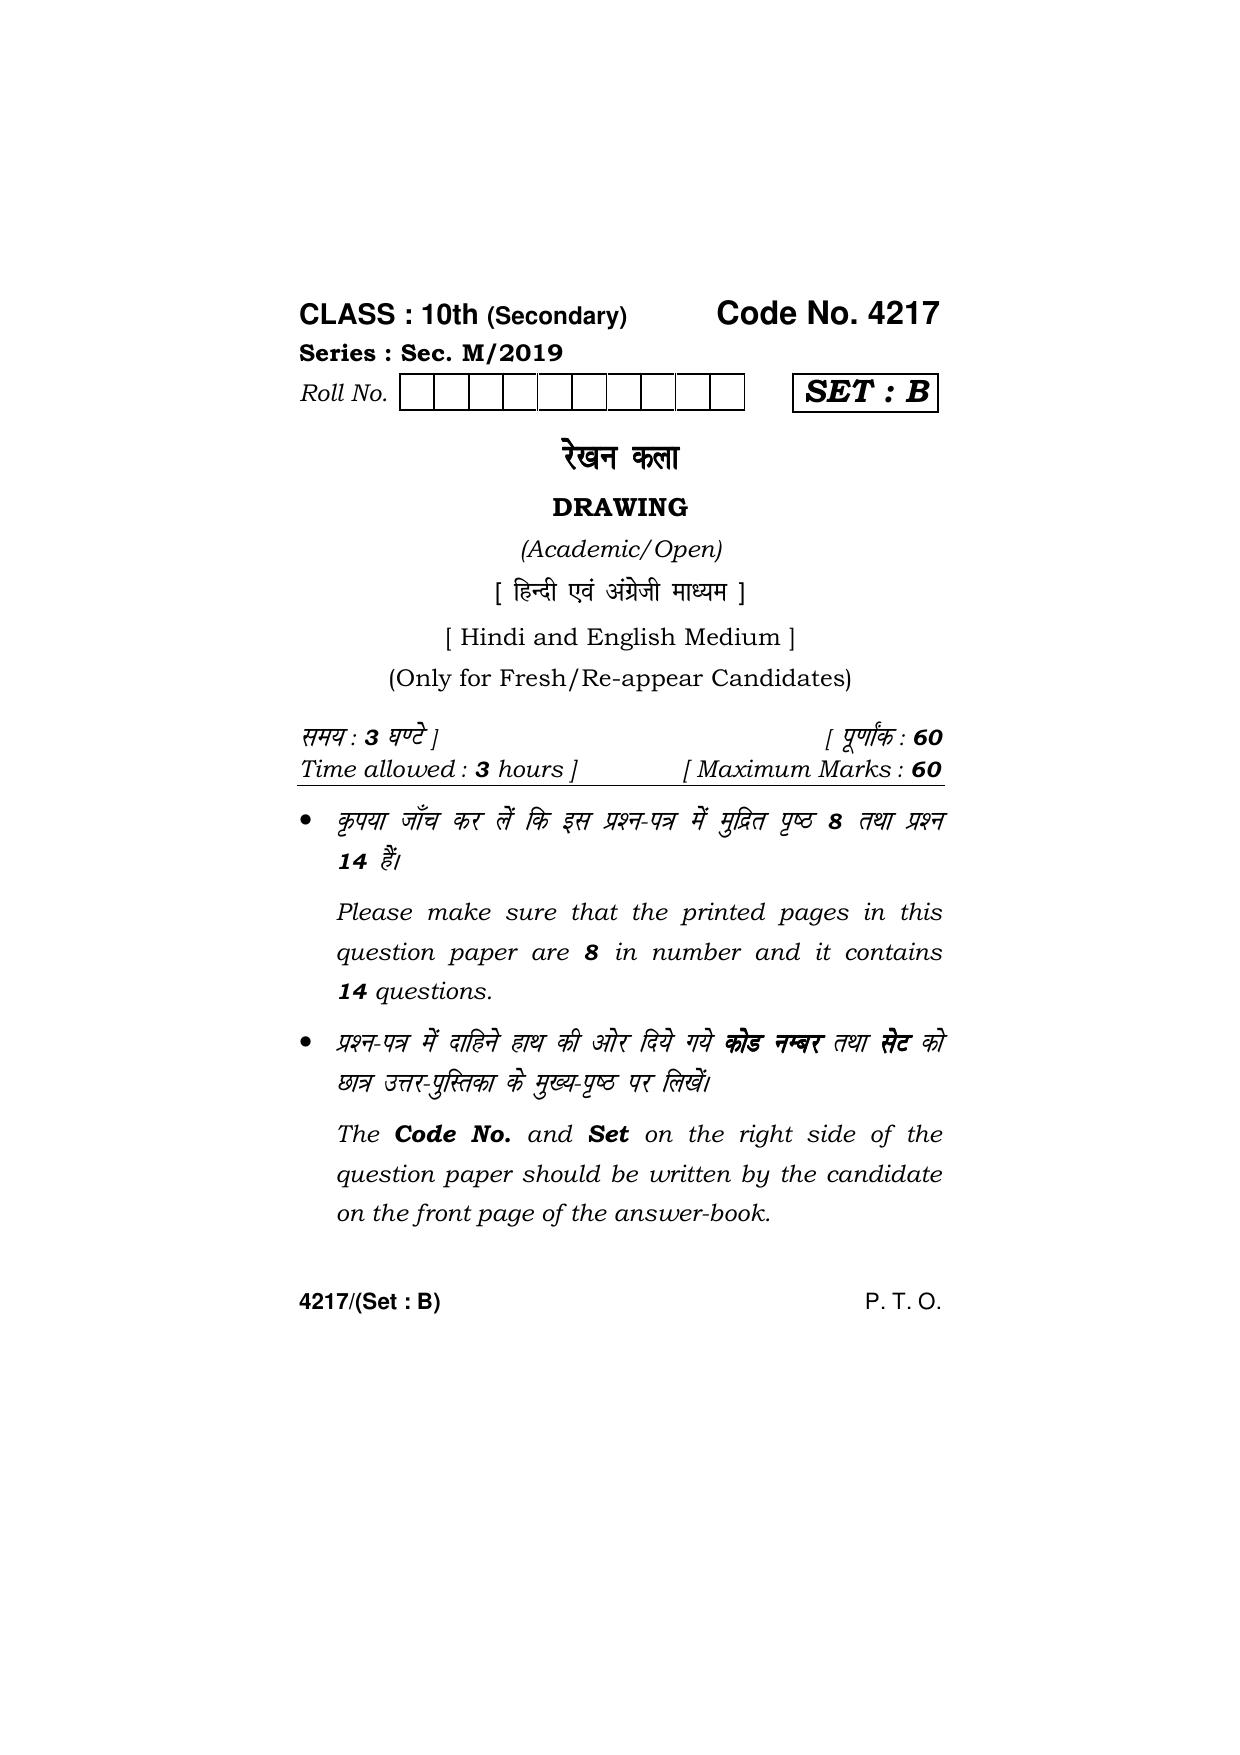 Haryana Board HBSE Class 10 Drawing (All Set) 2019 Question Paper - Page 9